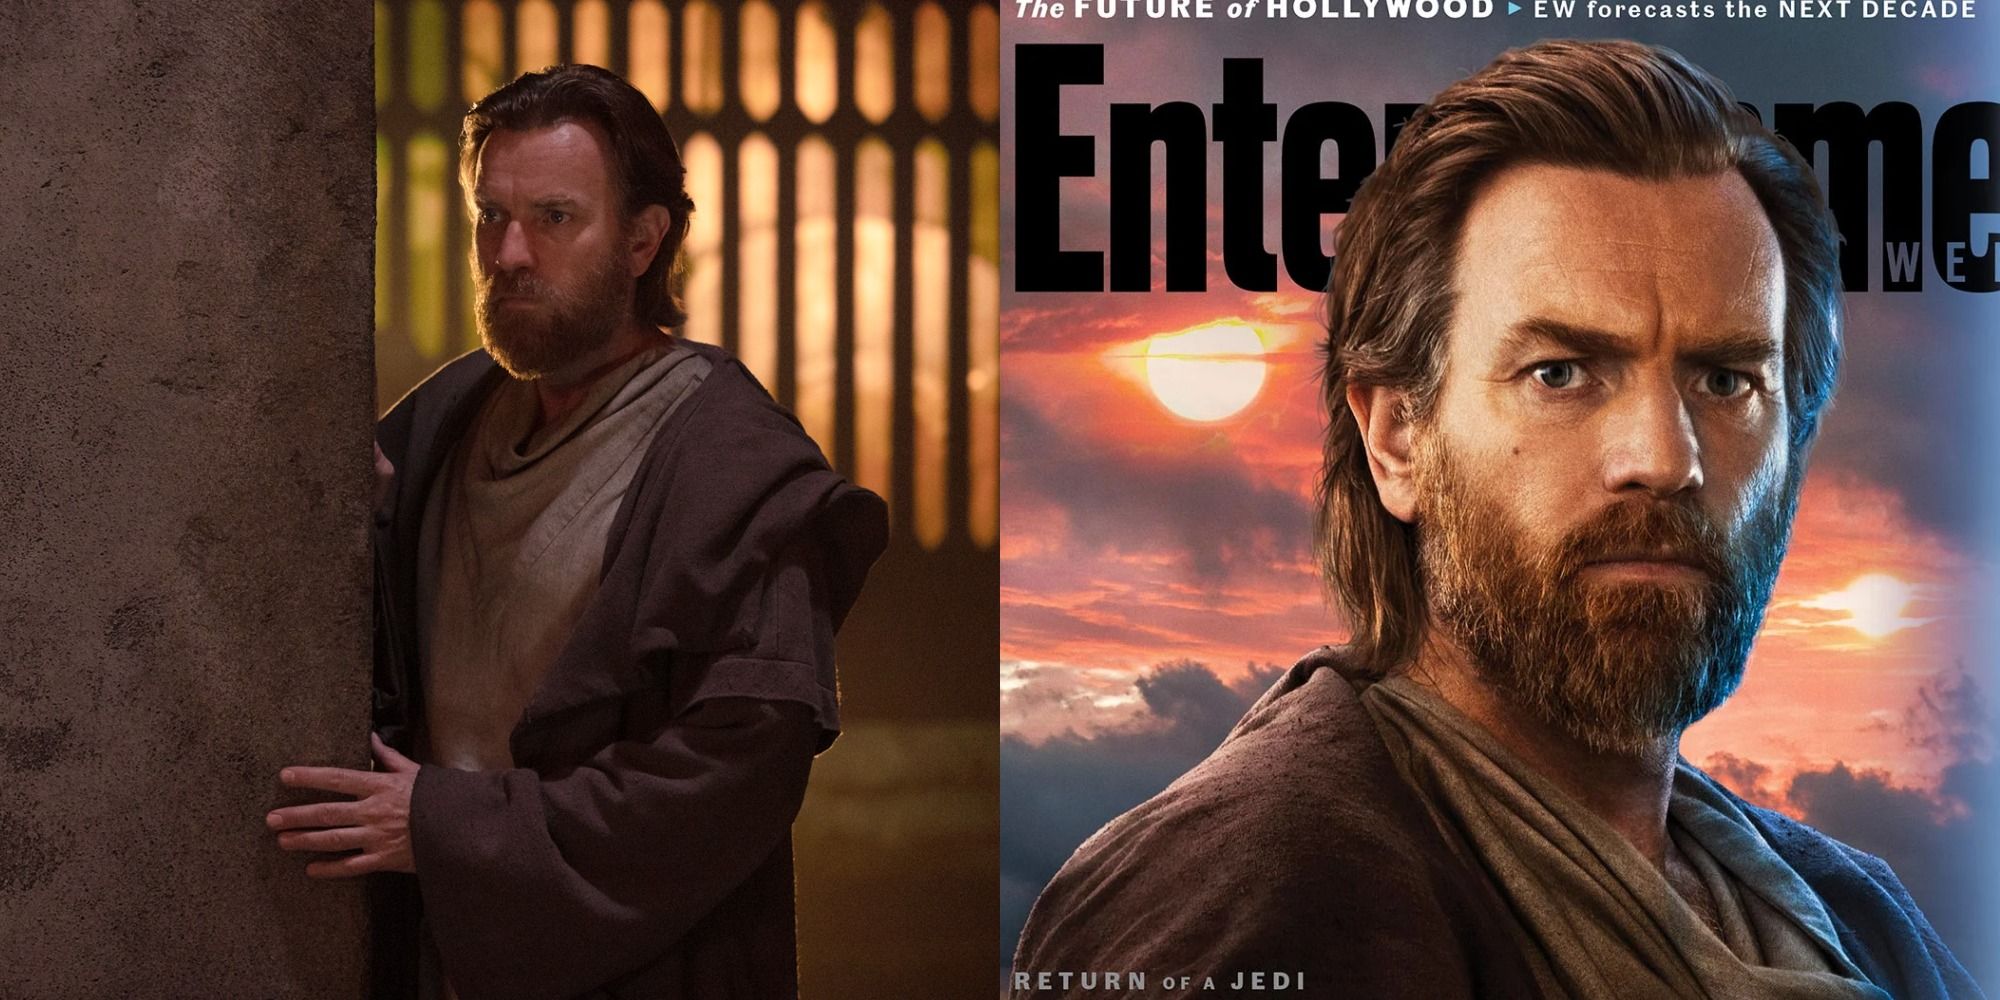 Split image of Obi Wan Kenobi looking from around a corner in the Obi Wan Kenobi series and a promo image of Obi Wan on an Entertainment Weekly cover